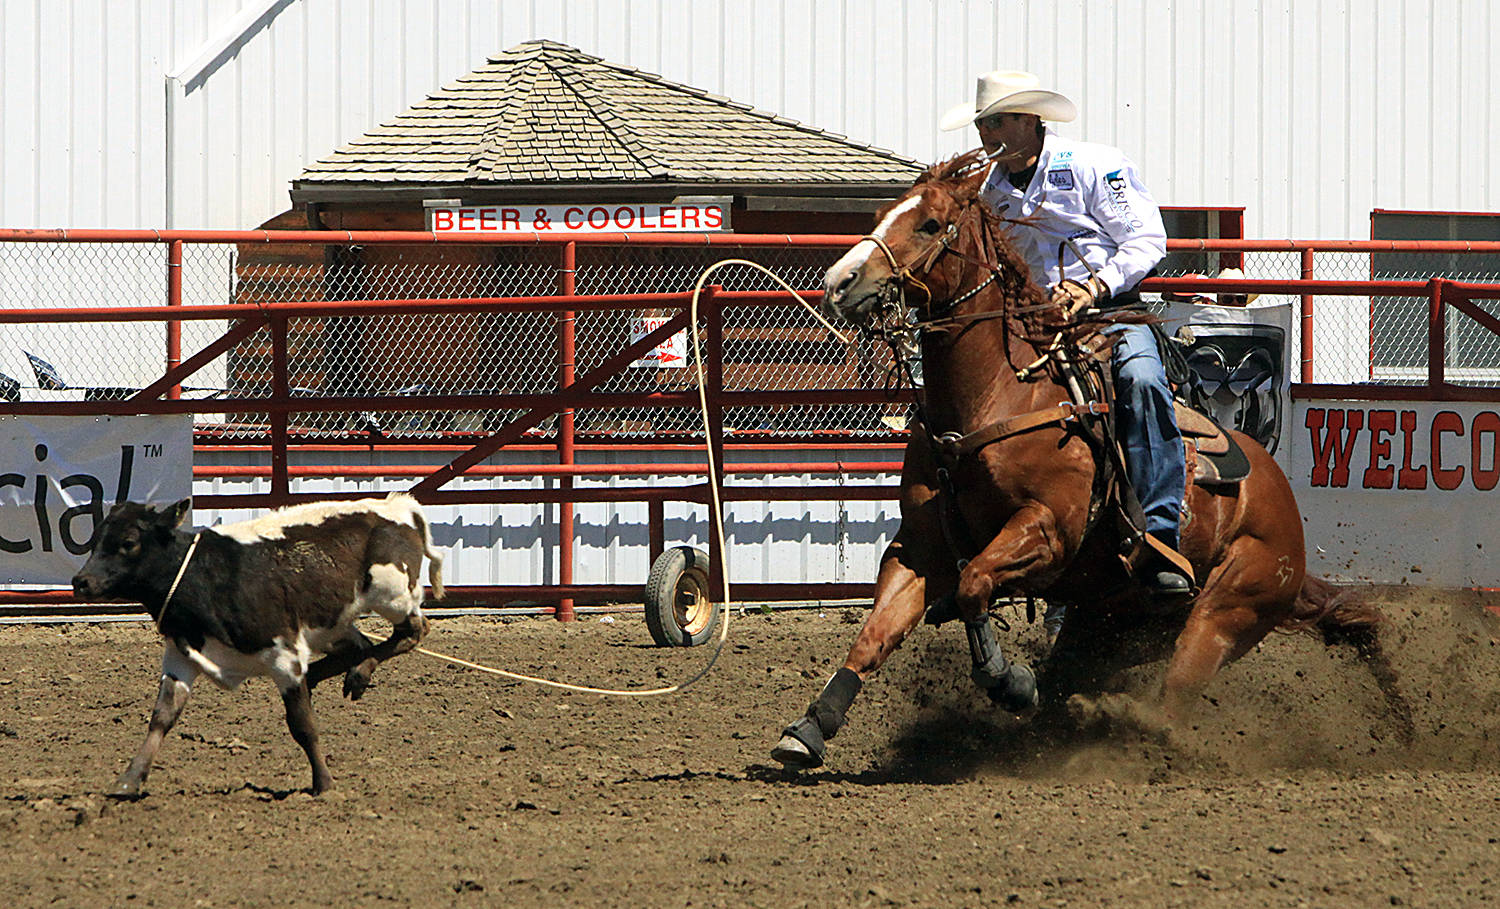 Carstairs Kyle Lucas ropes this calf and did have a decent time in Wednesday’s tie down roping, only for the calf to wriggle loose and earn him no time. Photo by Jordie Dwyer